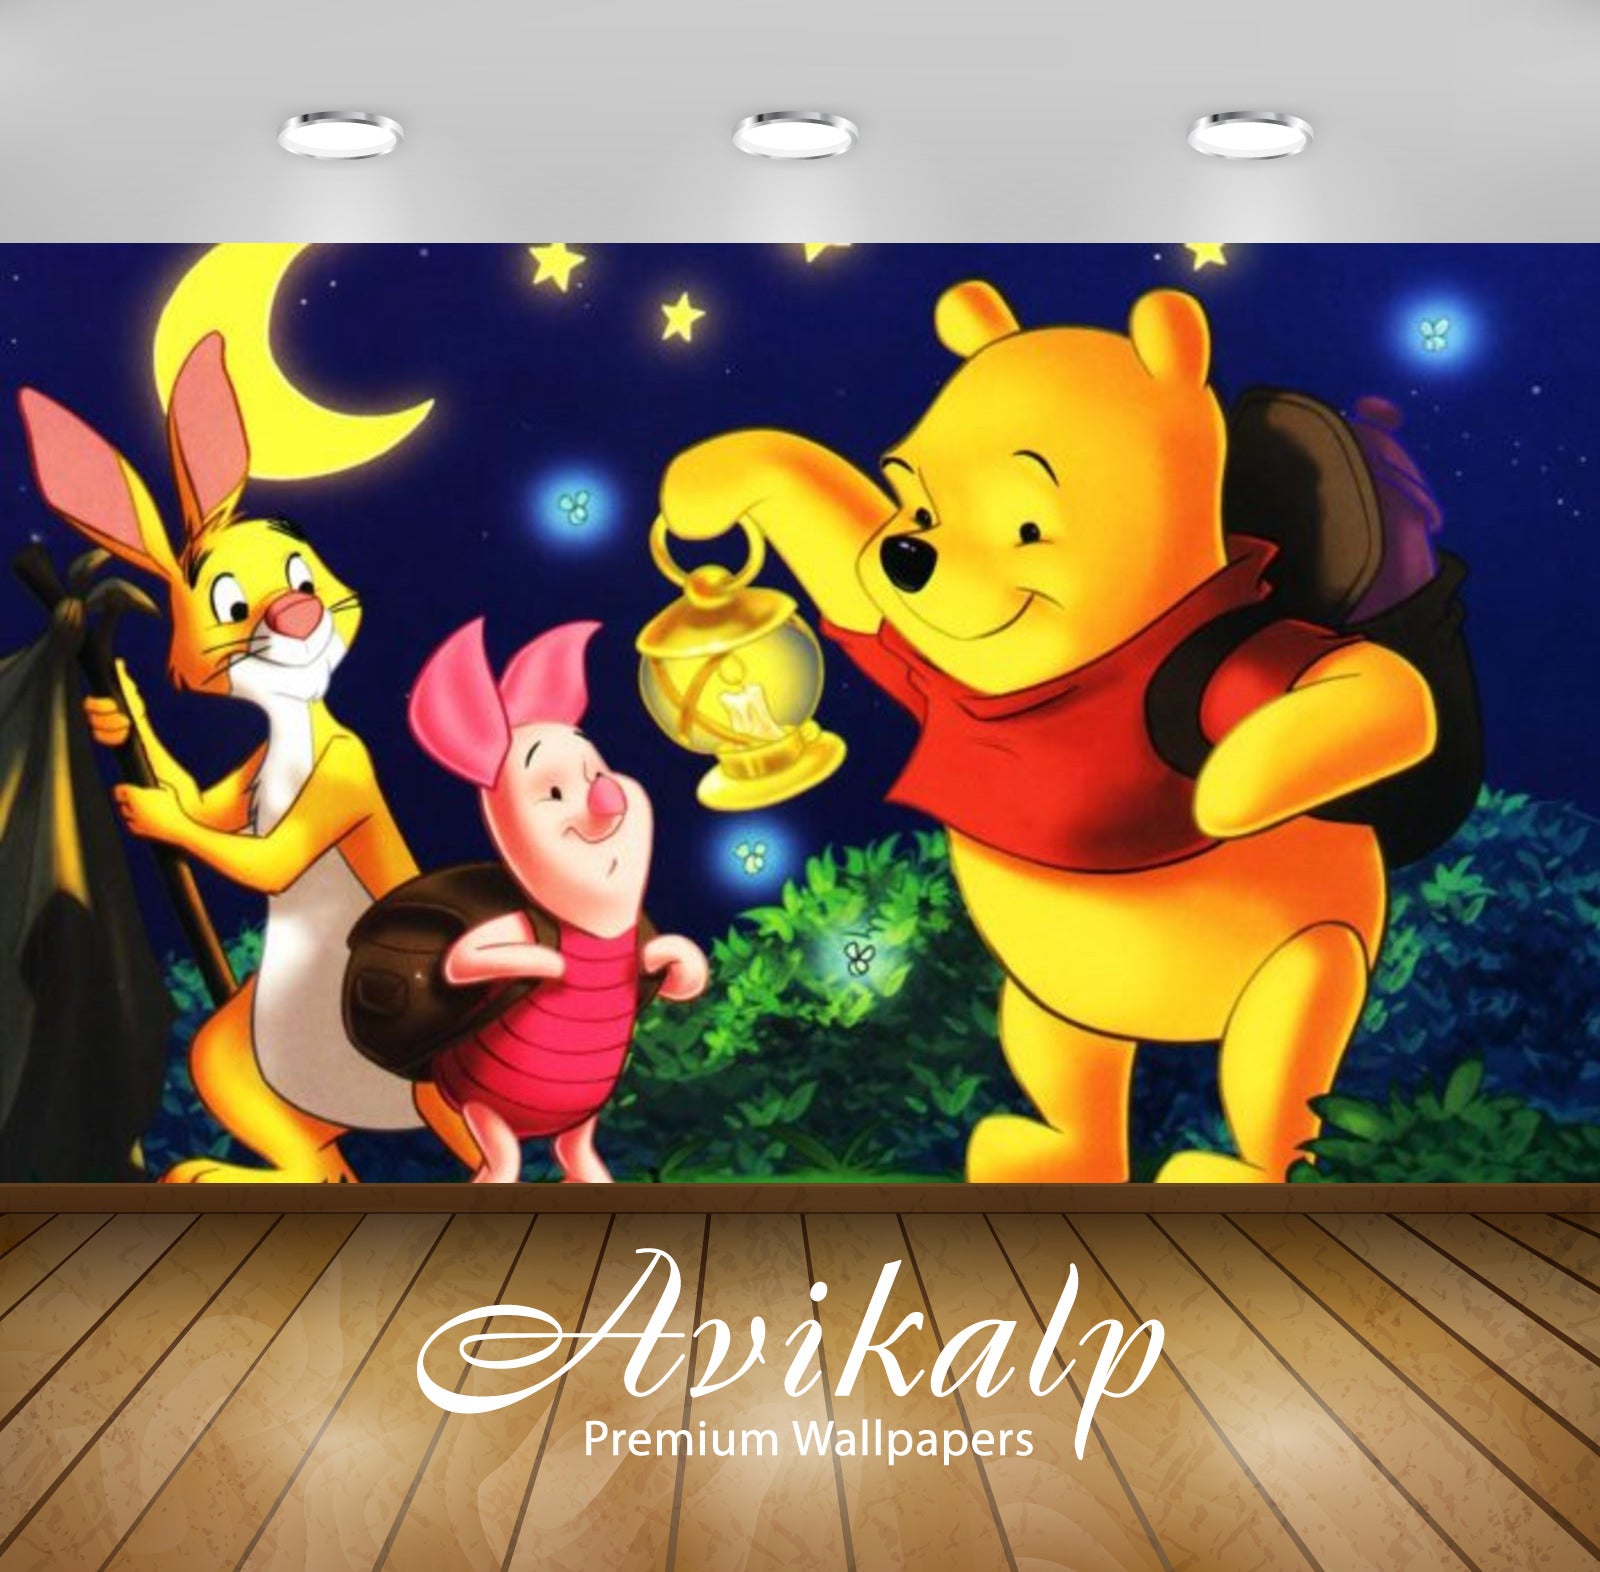 Avikalp Exclusive Awi2140 Rabbit Piglet And Winnie The Pooh Camping Lantern  Full HD Wallpapers for